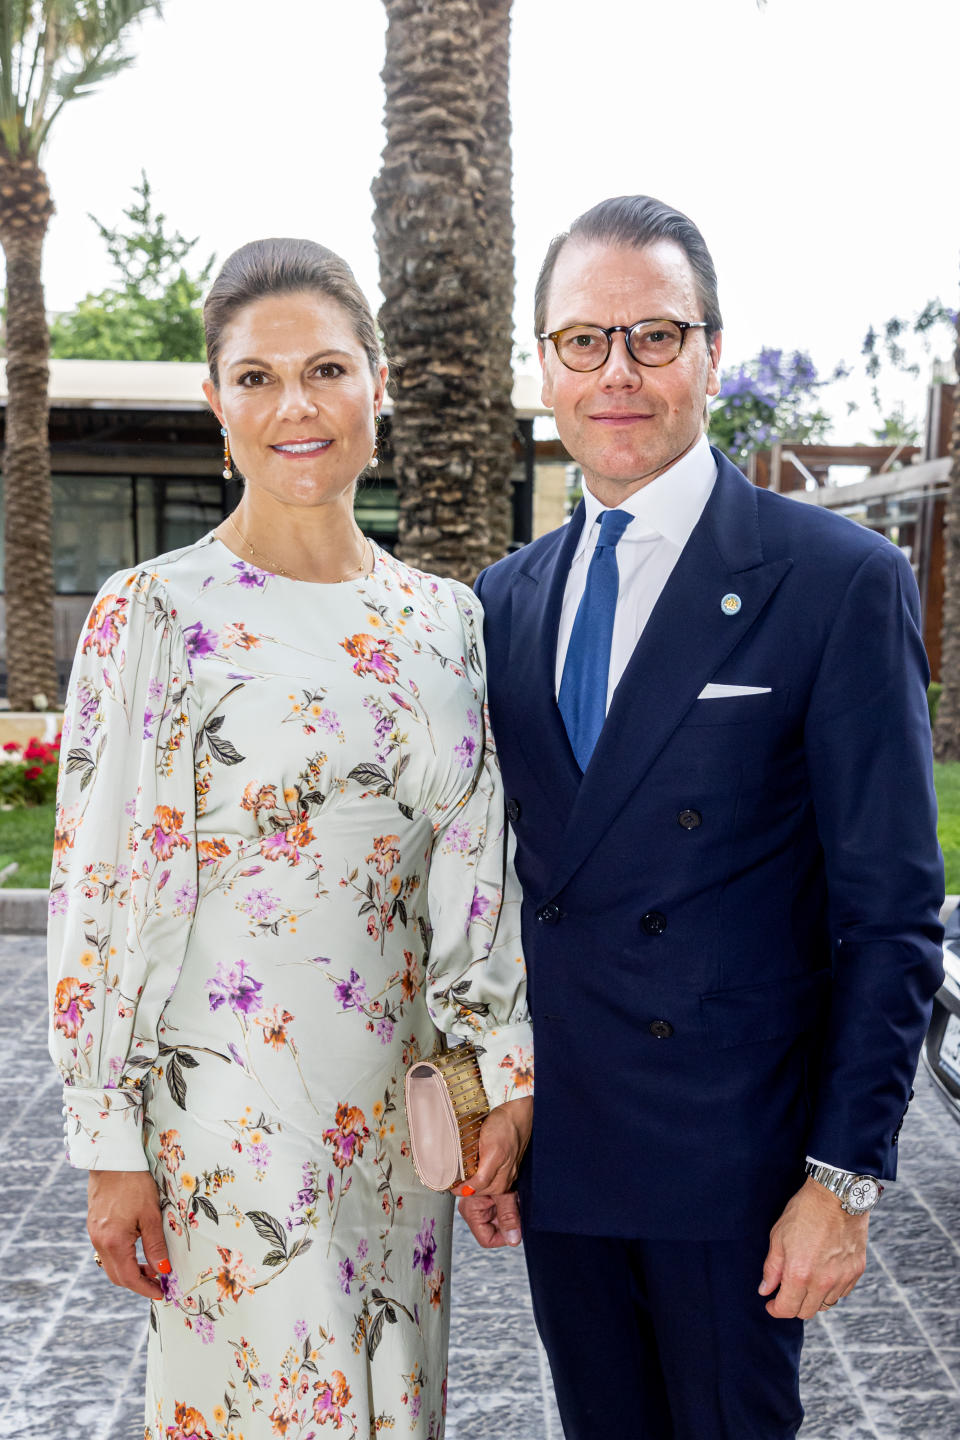 AMMAN, JORDAN - JUNE 1: Crown Princess Victoria of Sweden and Prince Daniel of Sweden leave their hotel for the wedding of Crown Prince Al Hussein Bin Abdullah of Jordan on June 1, 2023 in Amman, Jordan. (Photo by Patrick van Katwijk/Getty Images)